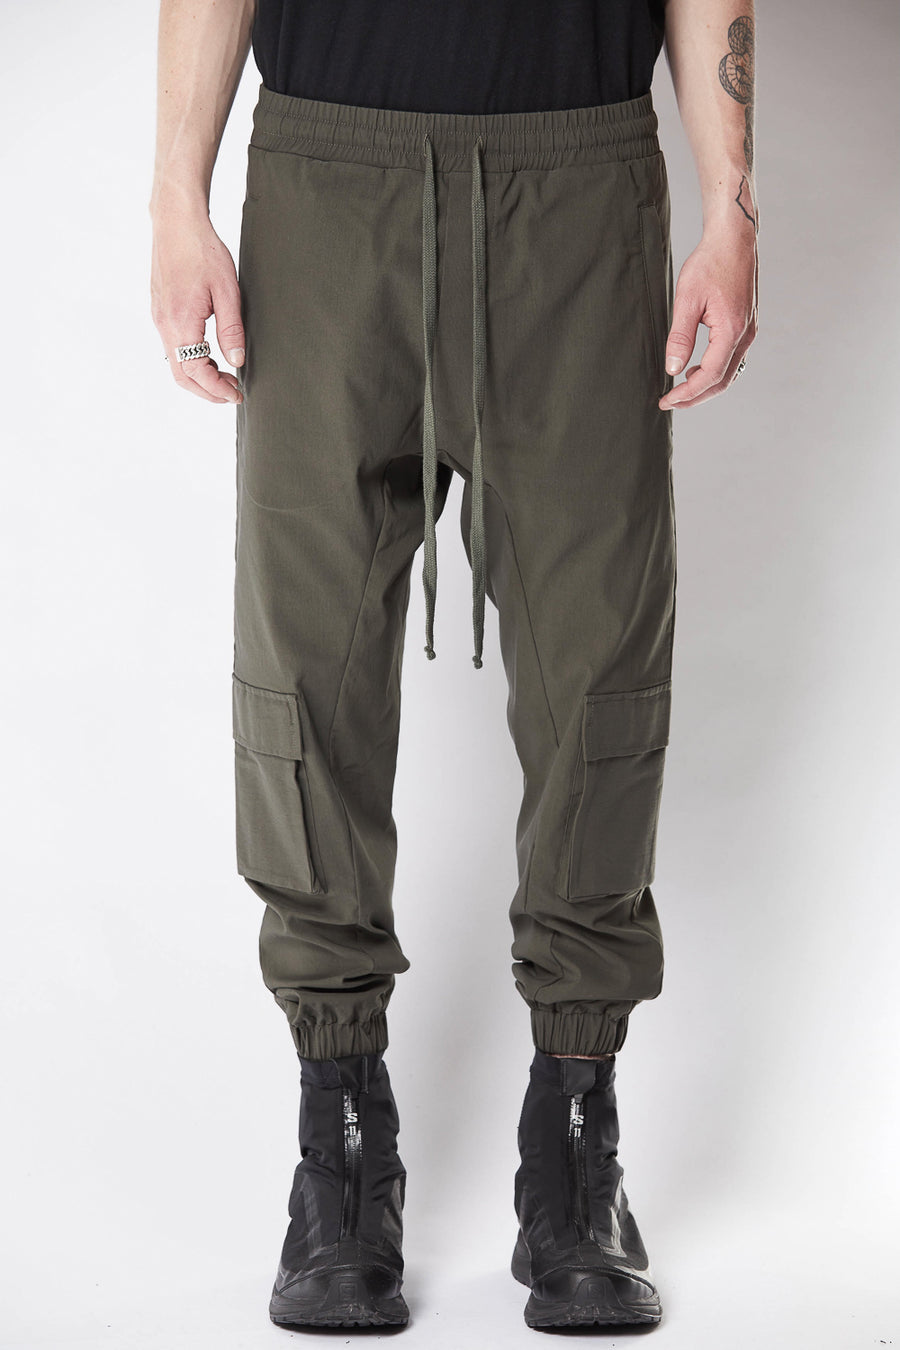 Buy the Thom Krom M ST 436 Sweatpants in Green at Intro. Spend £50 for free UK delivery. Official stockists. We ship worldwide.